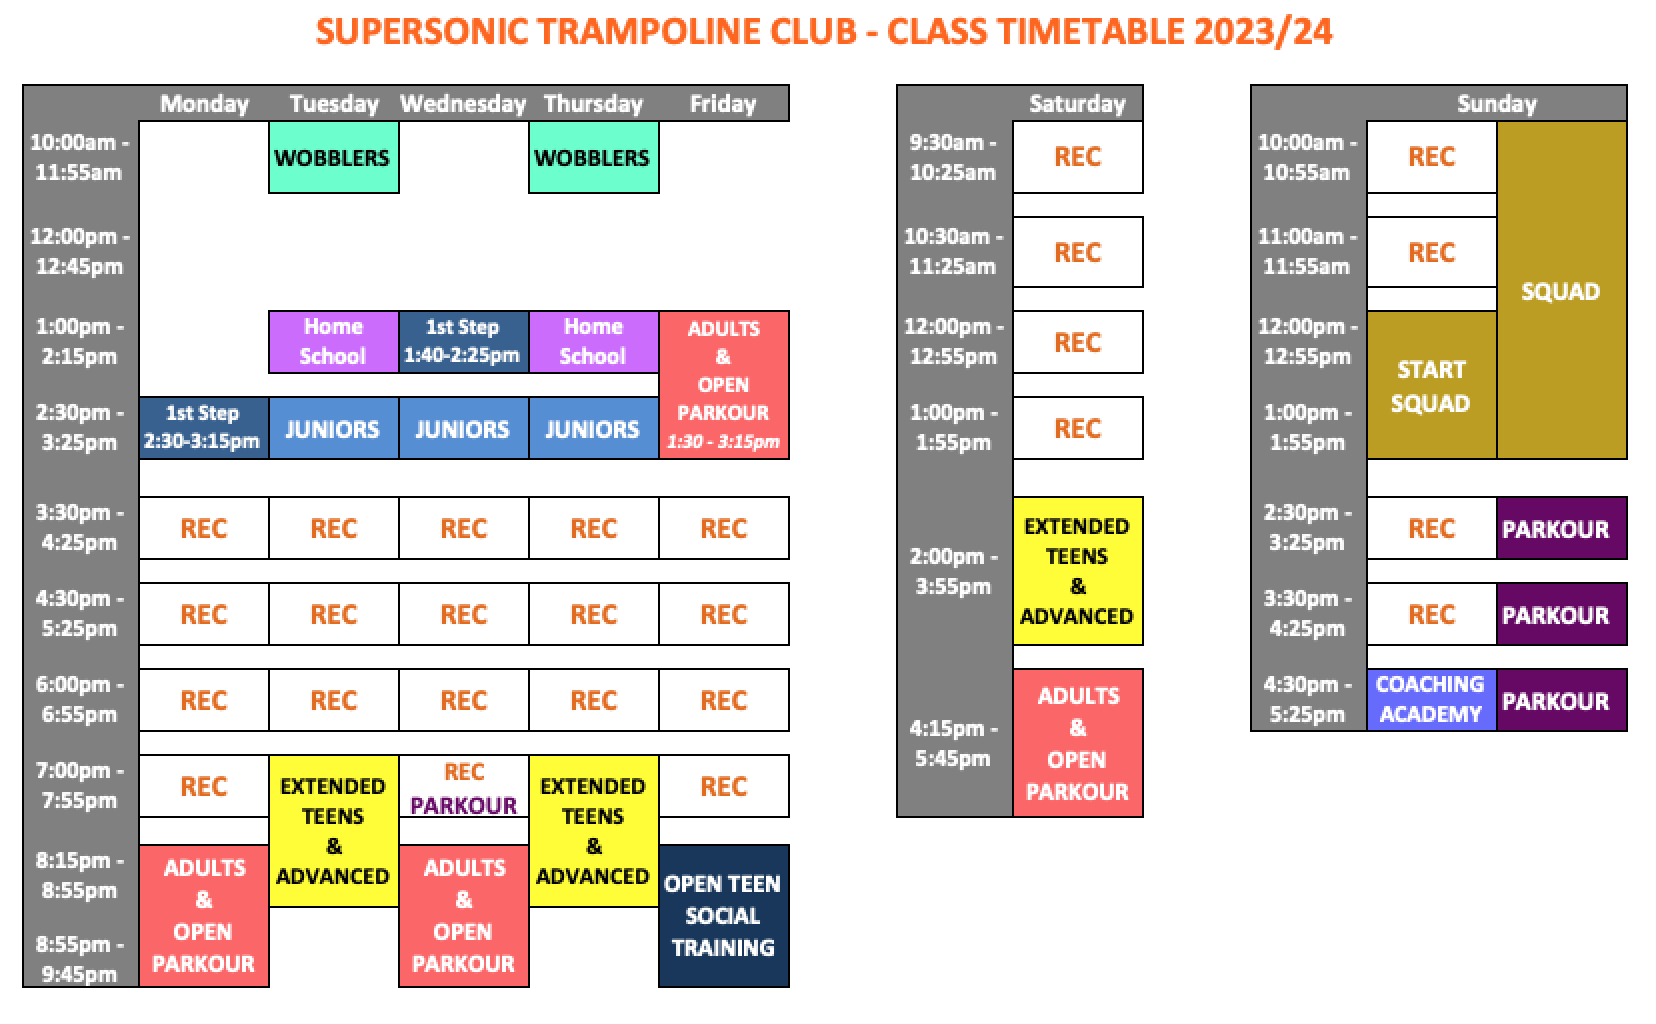 Current SuperSonic Class Timetable